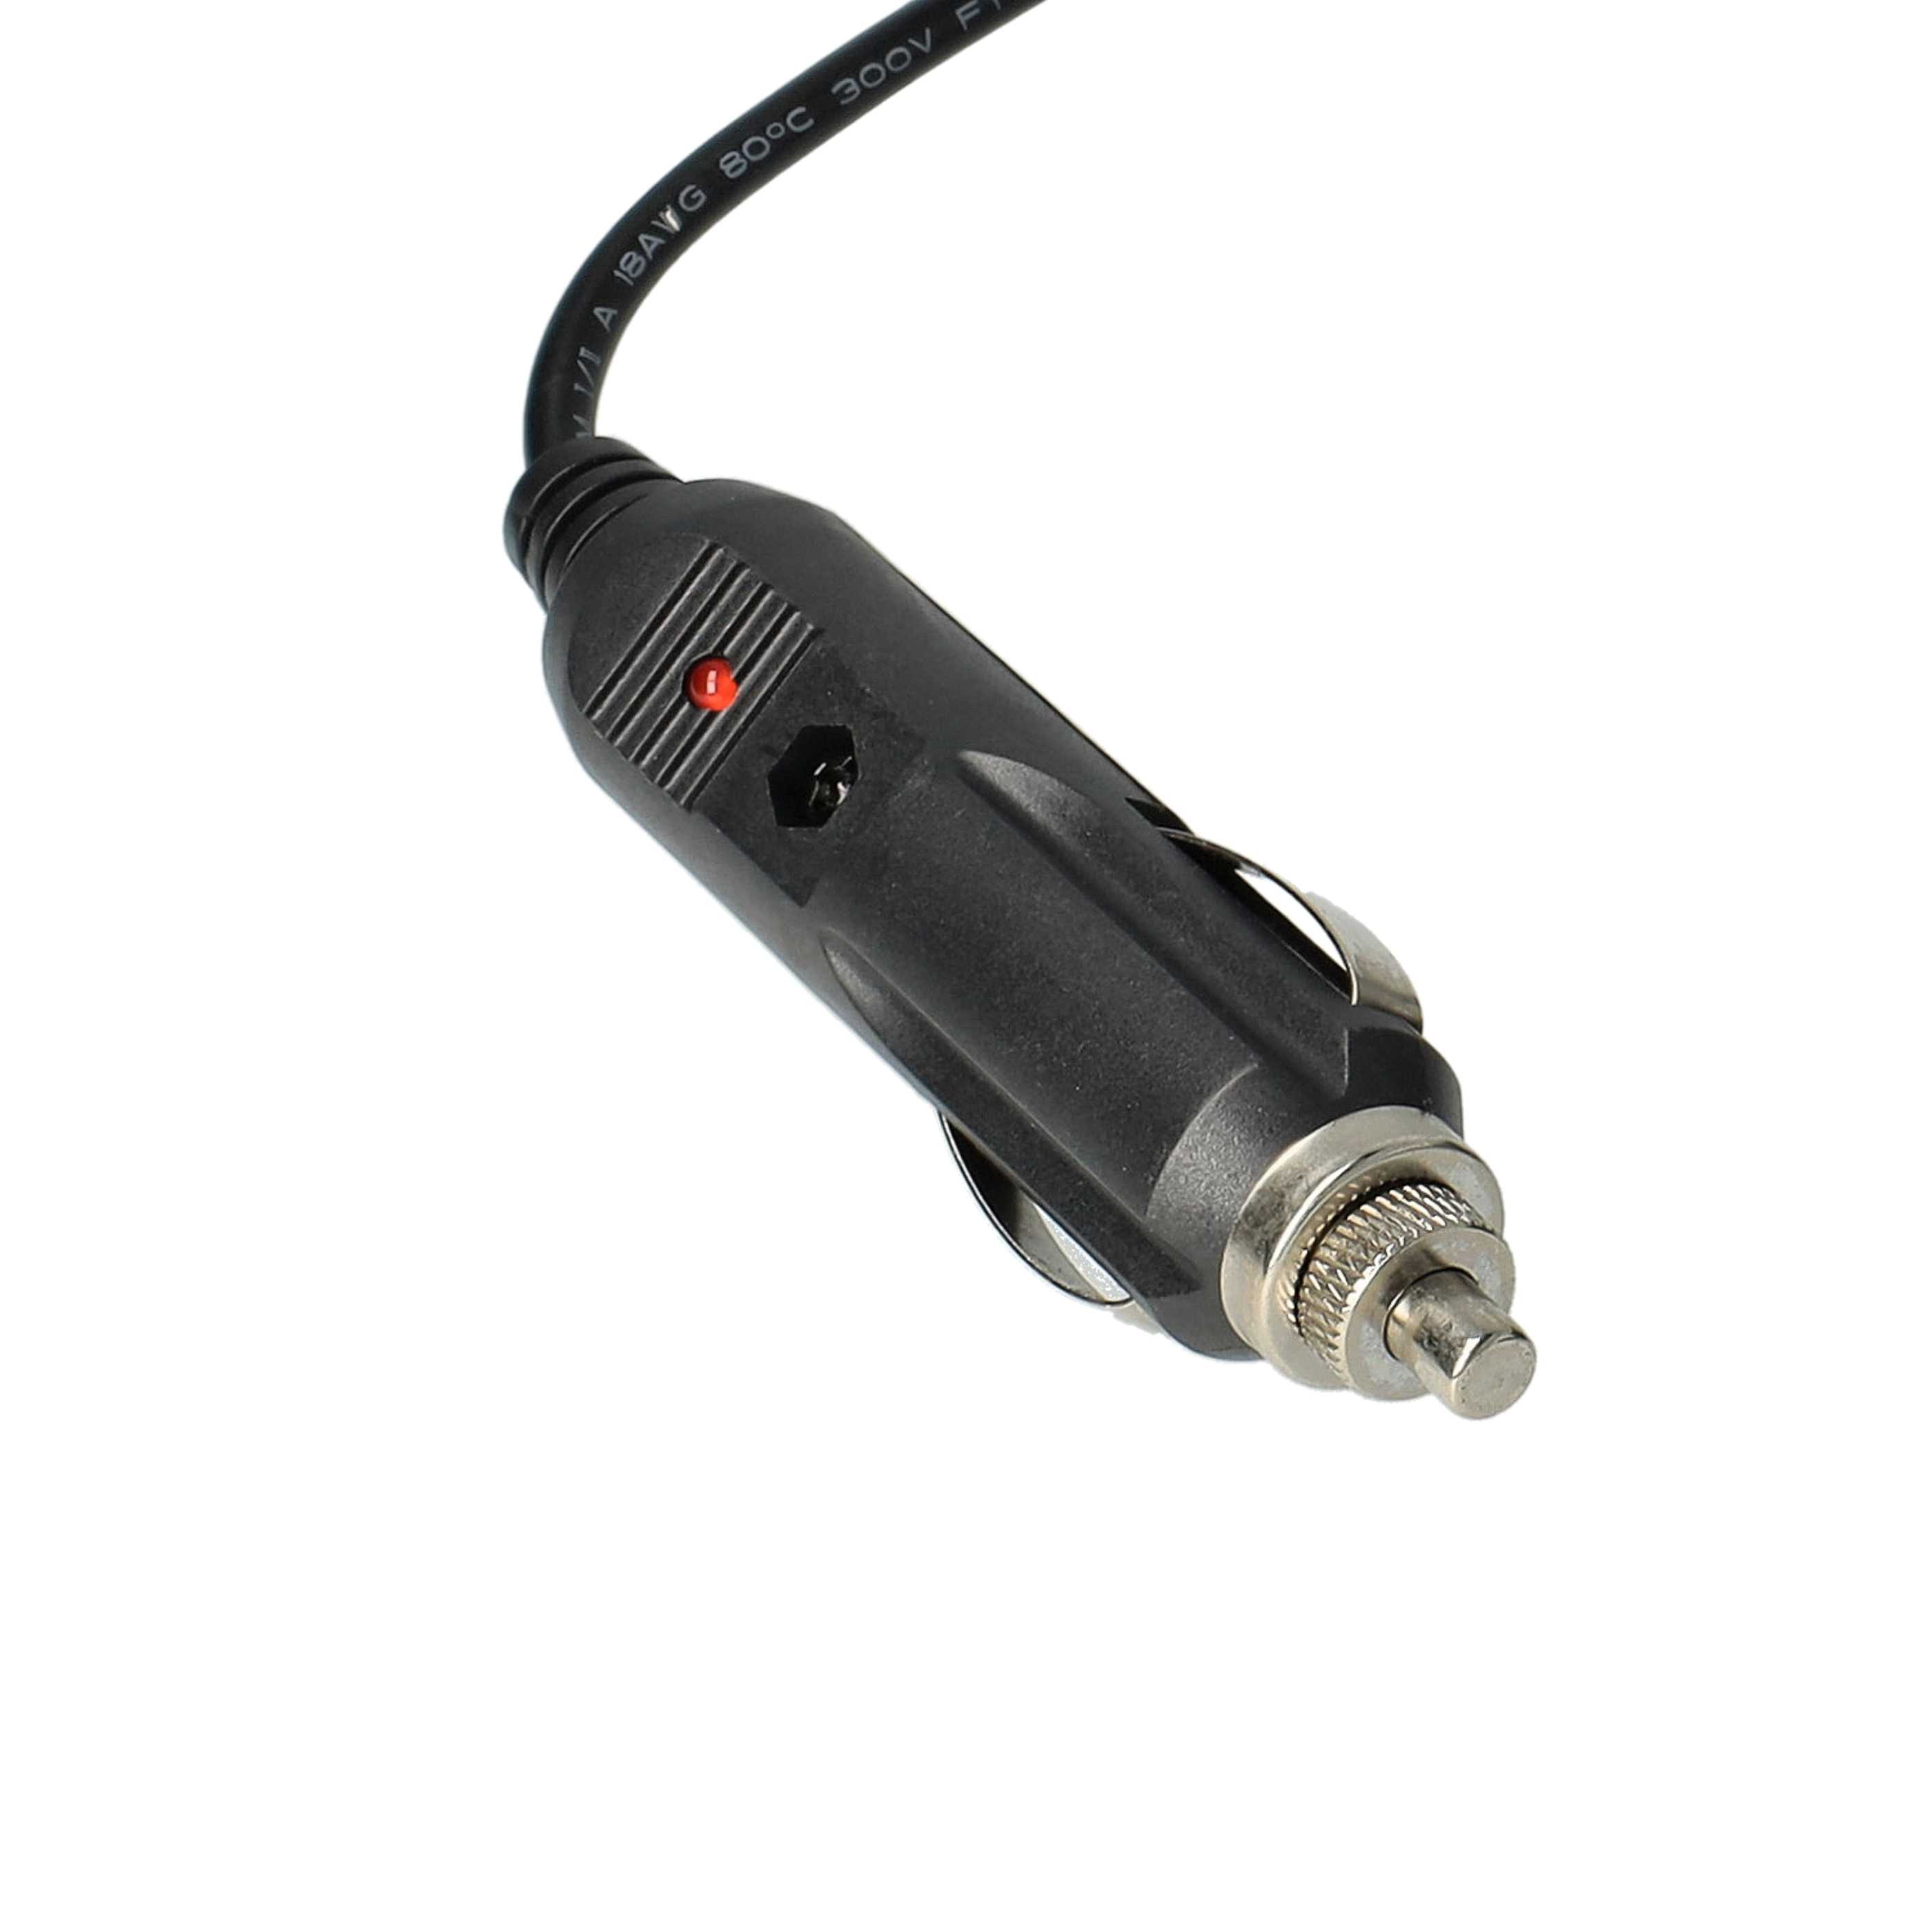 Vehicle Charger replaces Dell 0RM805, 0F266, 310-2862, 0RM809, 09T215, 02H098, 310-3399 for Notebook - 4.62 A